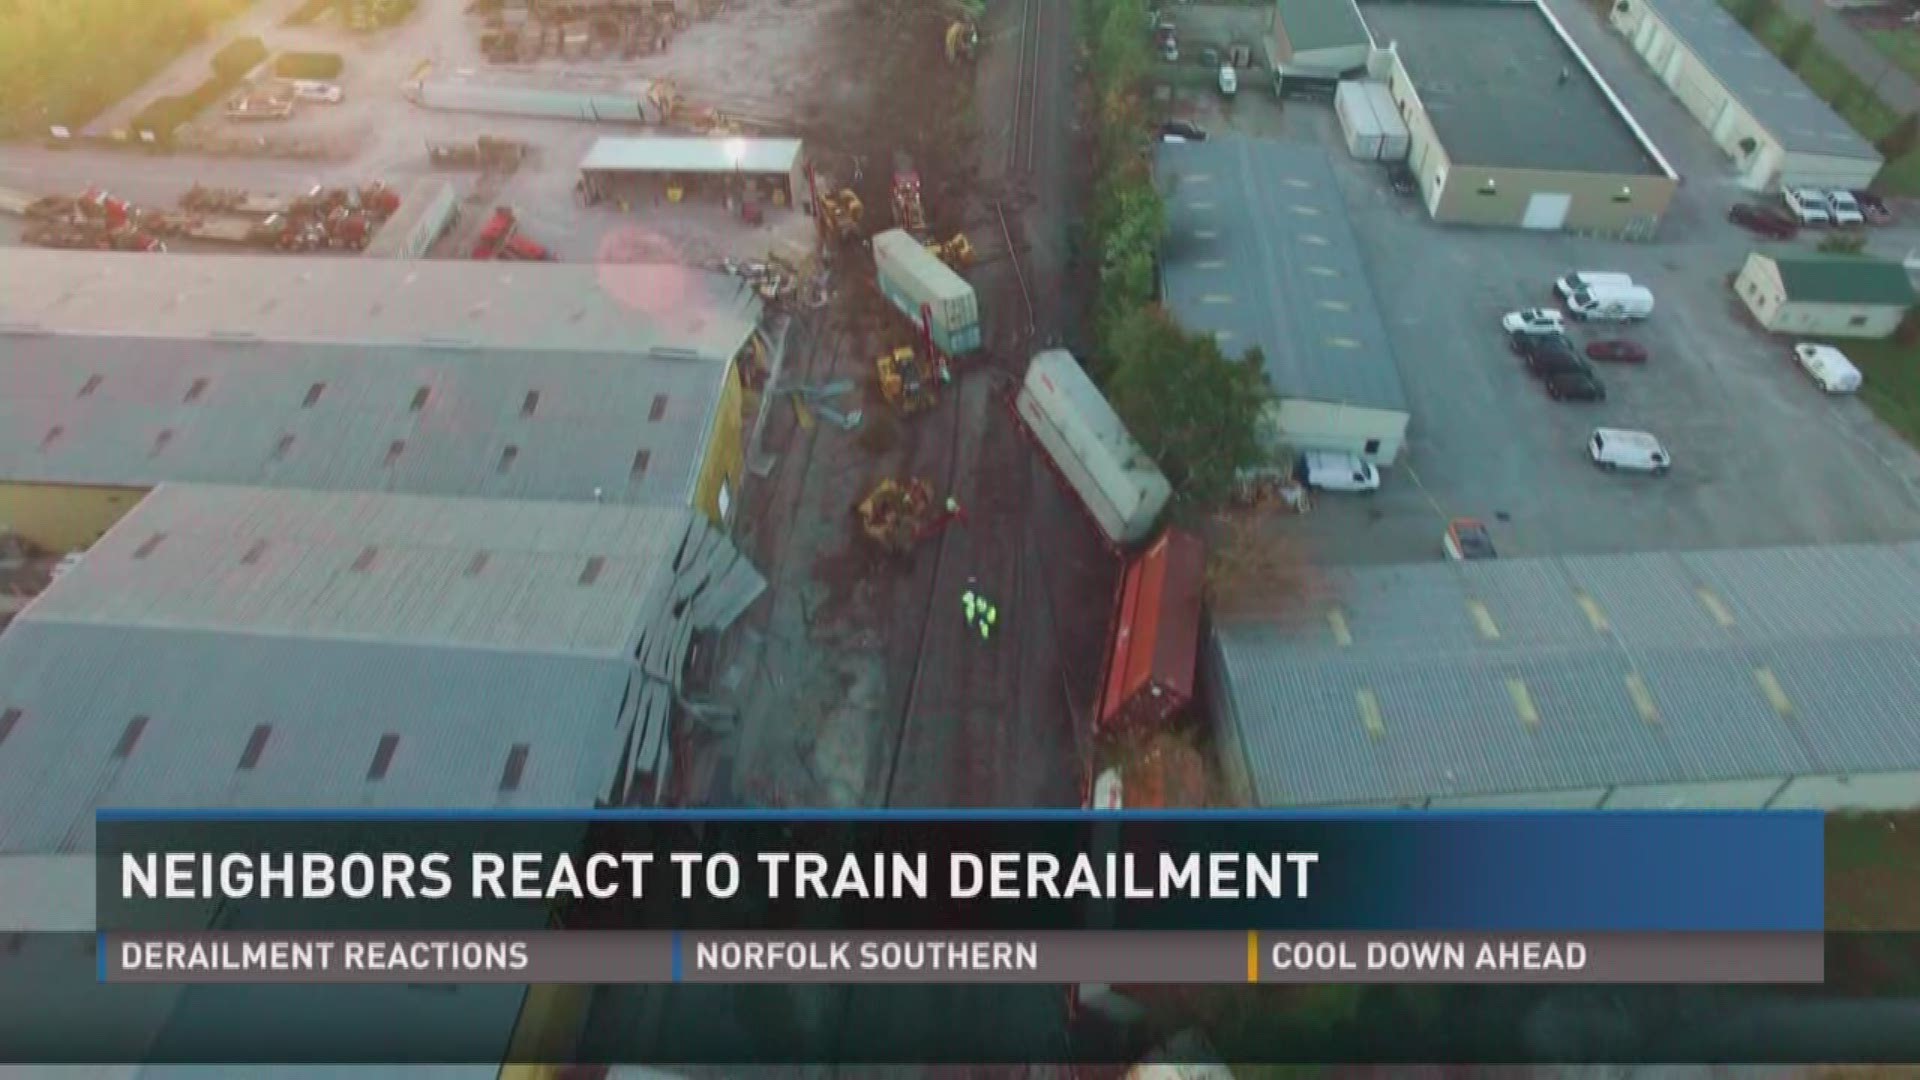 Train skids off tracks in North Knoxville Saturday evening, cleanup continues into Sunday. No injuries reported.